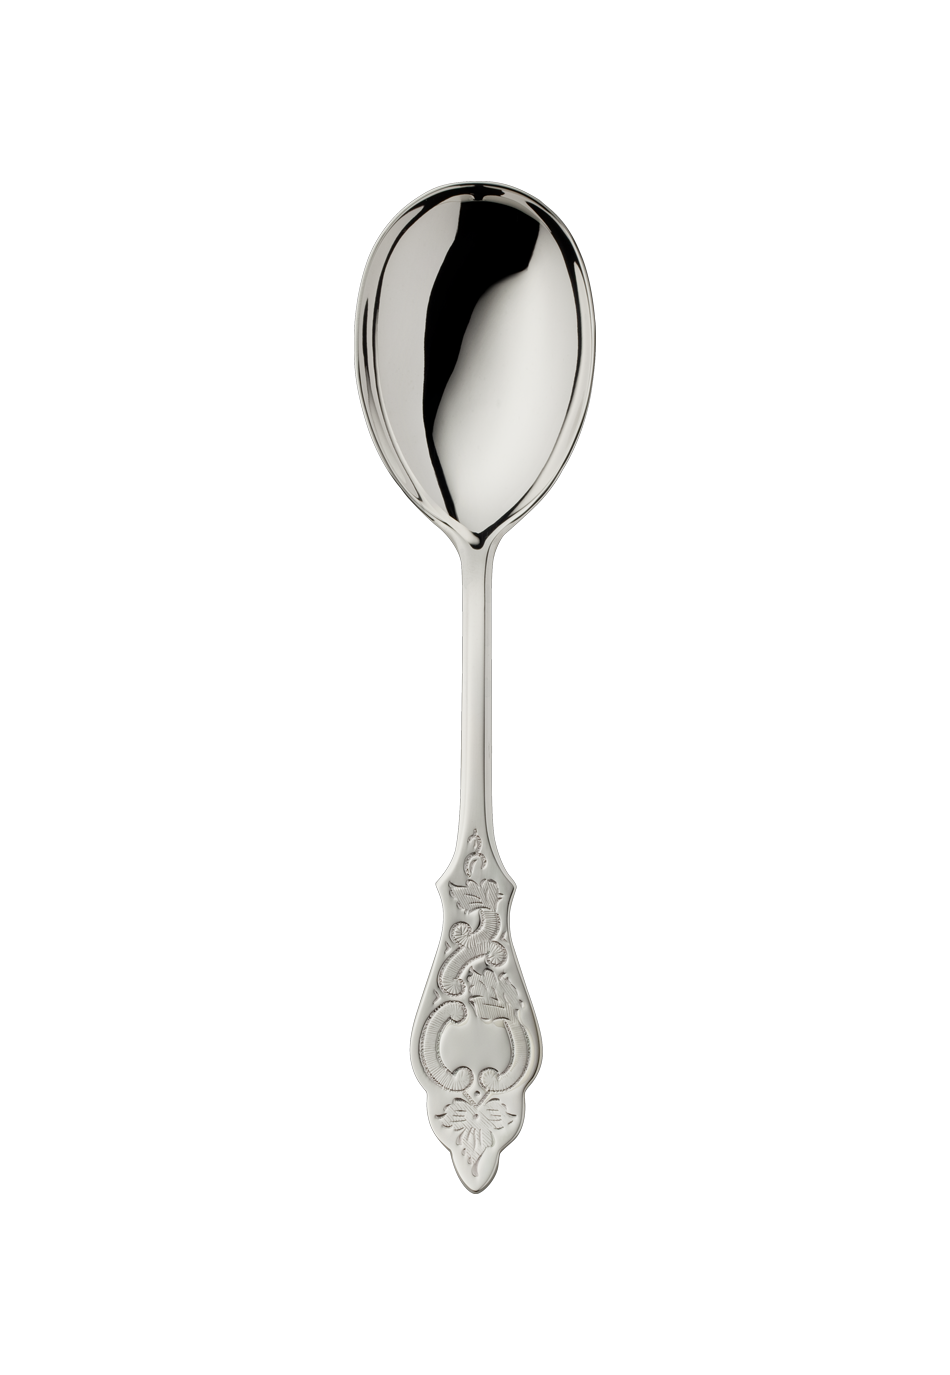 Ostfriesen Compote/Salad Serving Spoon, large (18/8 stainless steel)